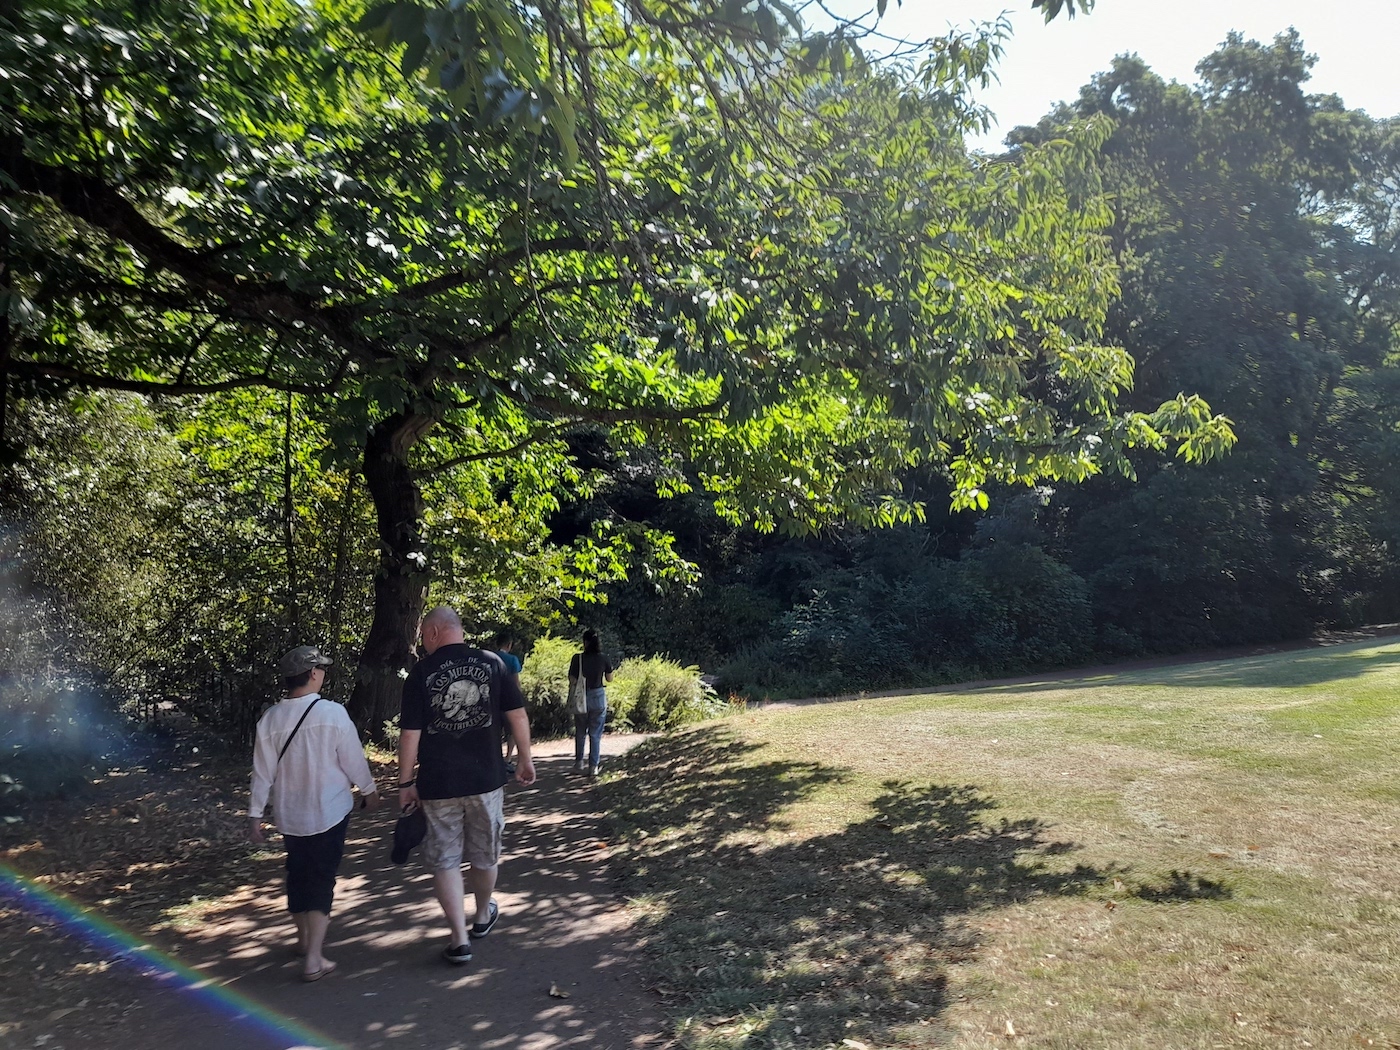 Two participants walk along a path with a green field to their right and trees to their left. The walkers are in the trees' shadows cast by the bright sun.